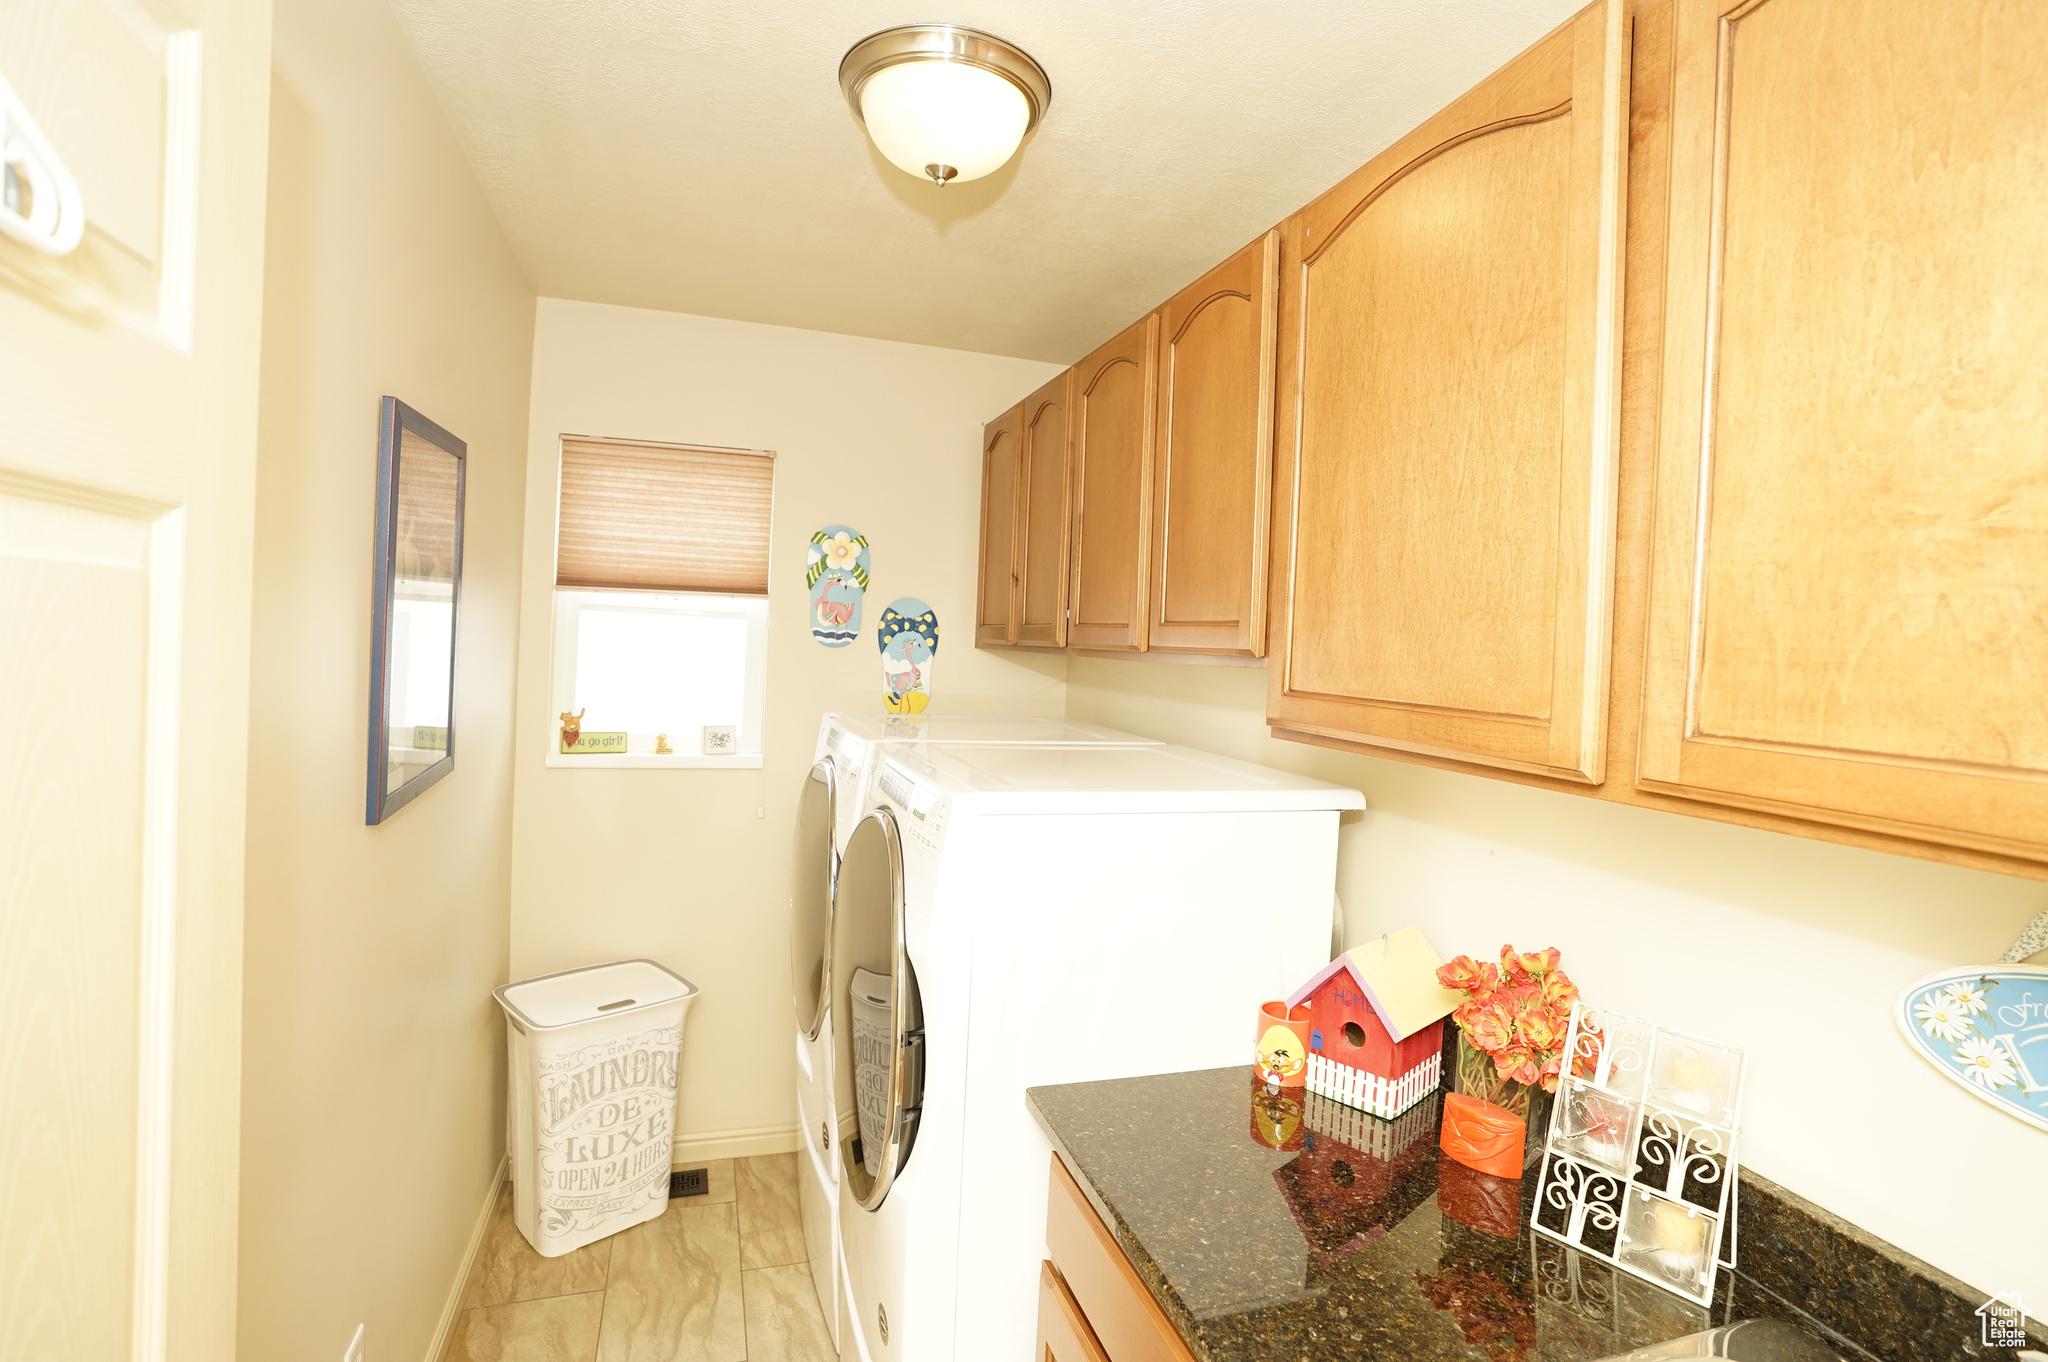 Laundry room with cabinets, light tile flooring, and washer and dryer